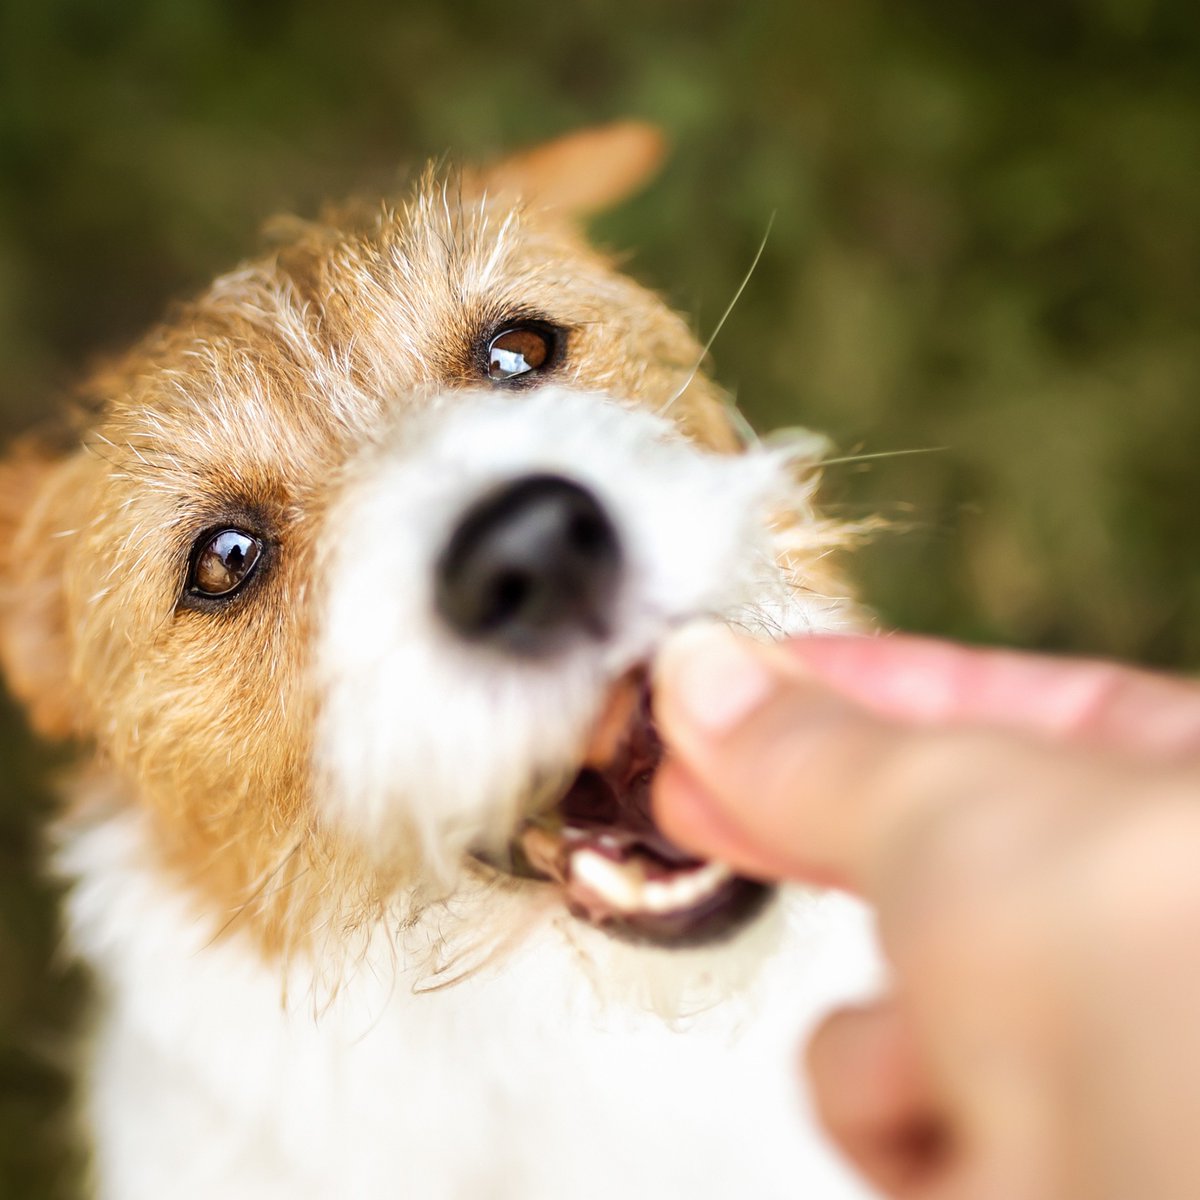 🐶✨ Treat your pooch to the goodness of Superpet Natural! Check out our latest blog to explore how these treats not only delight but also nourish. #DogTreats #NaturalPetCare #HealthyPets #Superpet

🔗 Learn more: [ow.ly/lHtc50RAEGa]